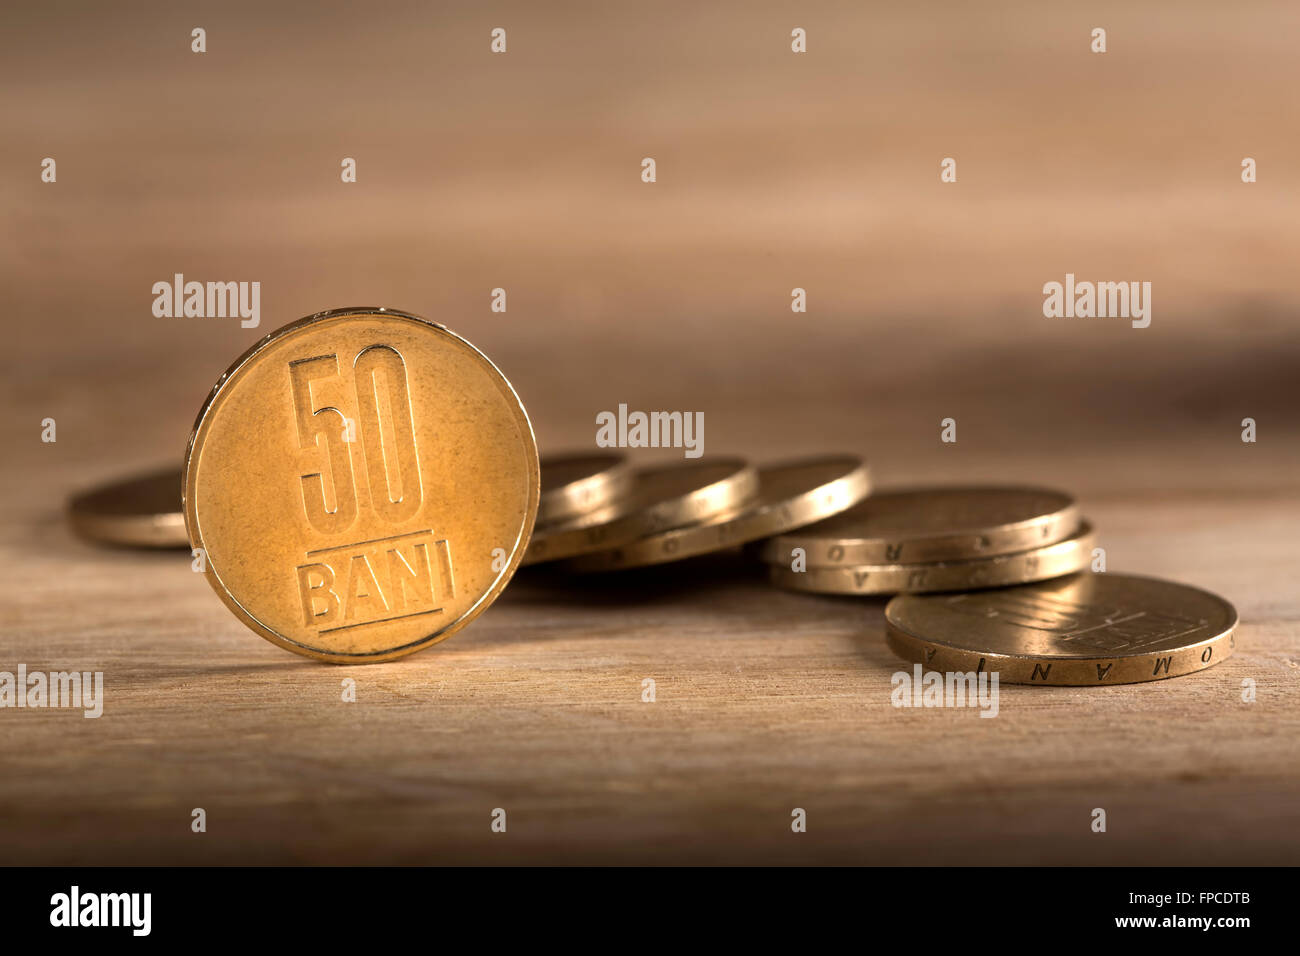 Stacks of Romanian fifty bani coins on wooden table, with selective focus Stock Photo